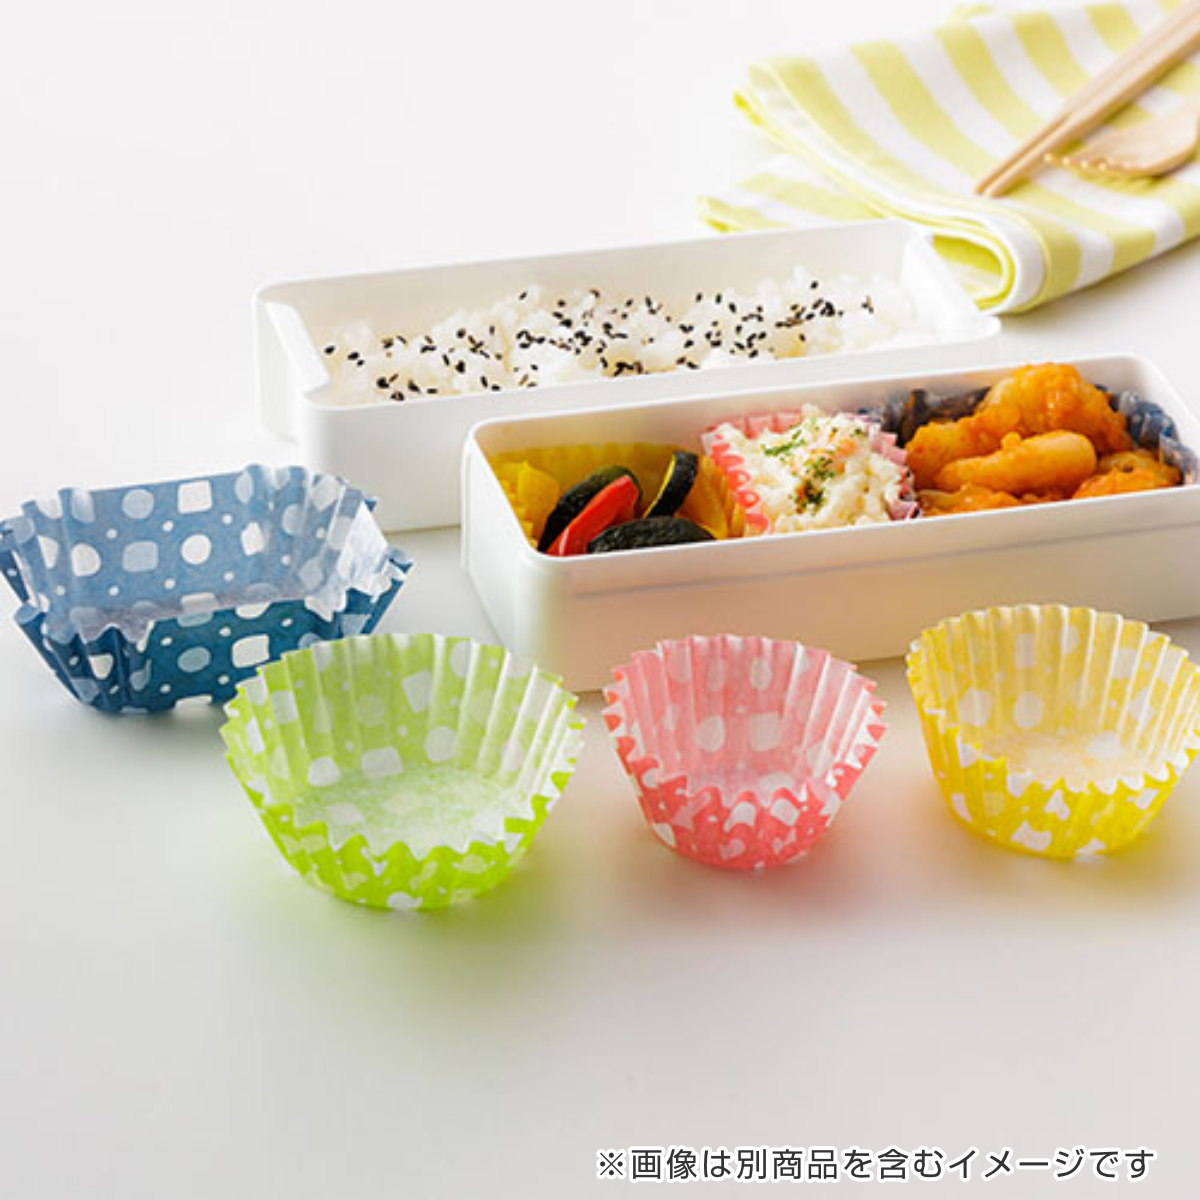  side dish cup 66 sheets entering .. oil ..... cup square profit for (.. present cup 66 piece entering high capacity side dish inserting . present child . water made in Japan )